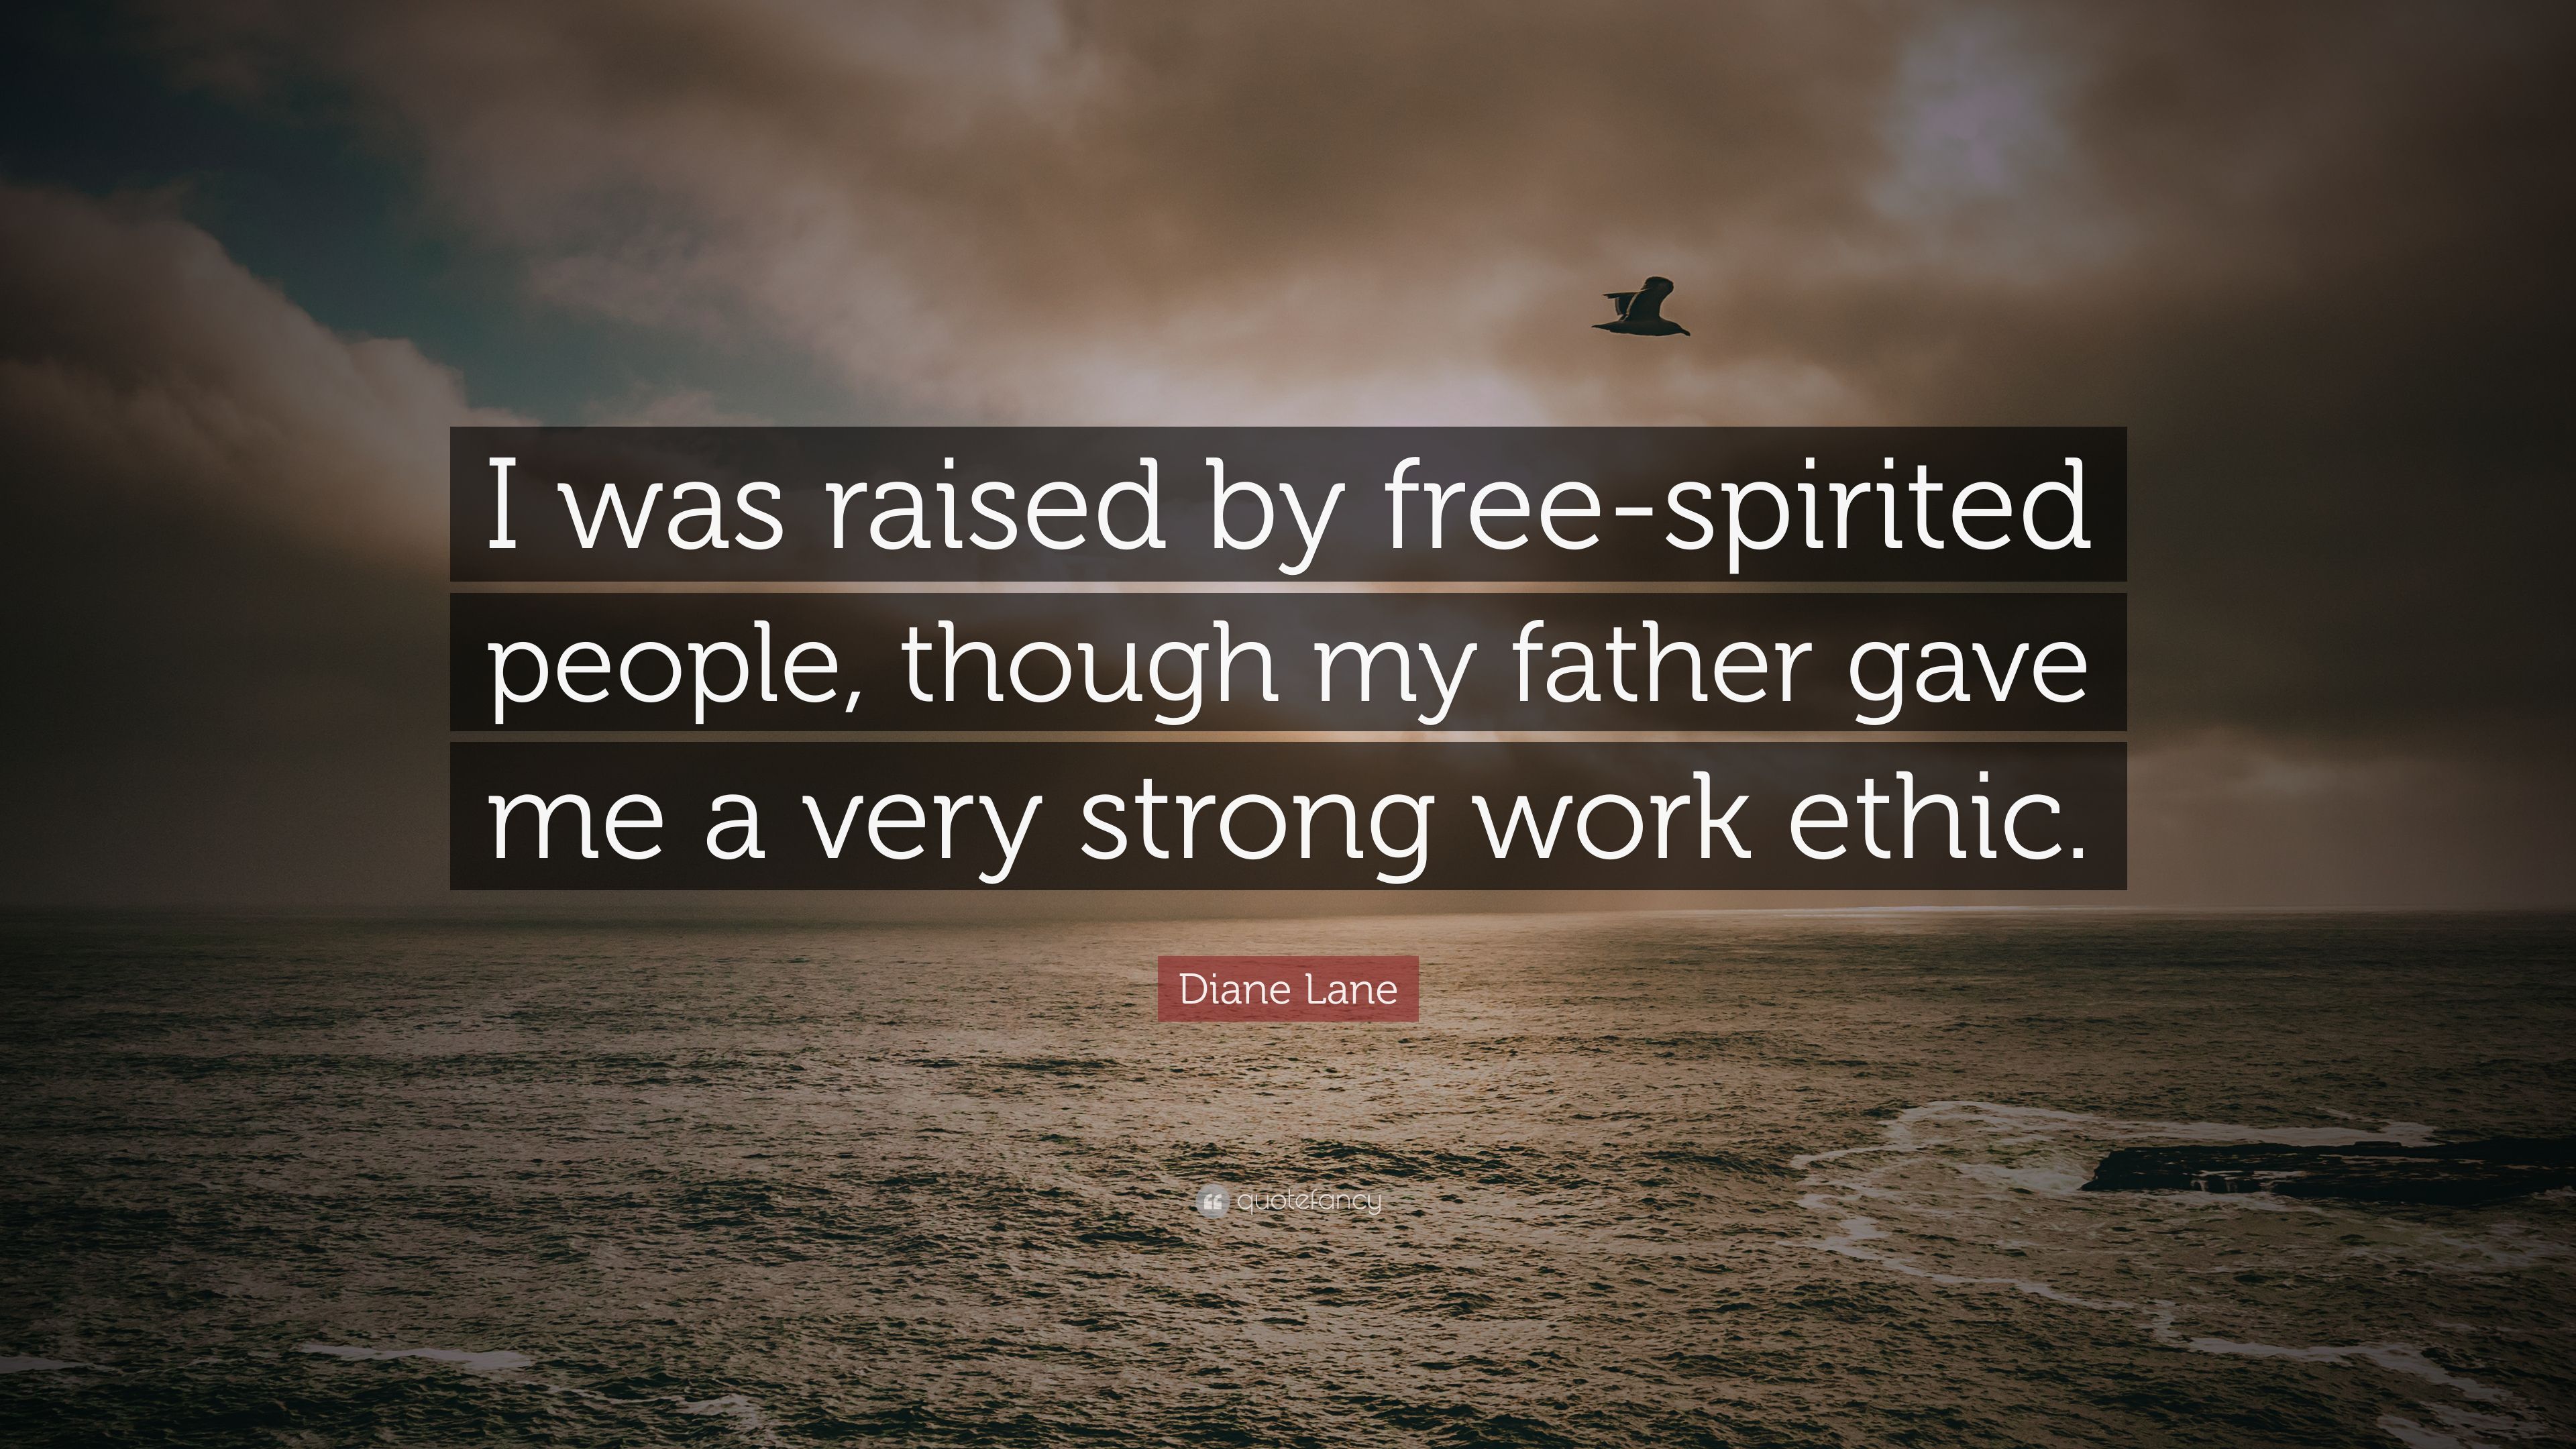 Diane Lane Quote: “I Was Raised By Free Spirited People, Though My Father Gave Me A Very Strong Work Ethic.” (7 Wallpaper)